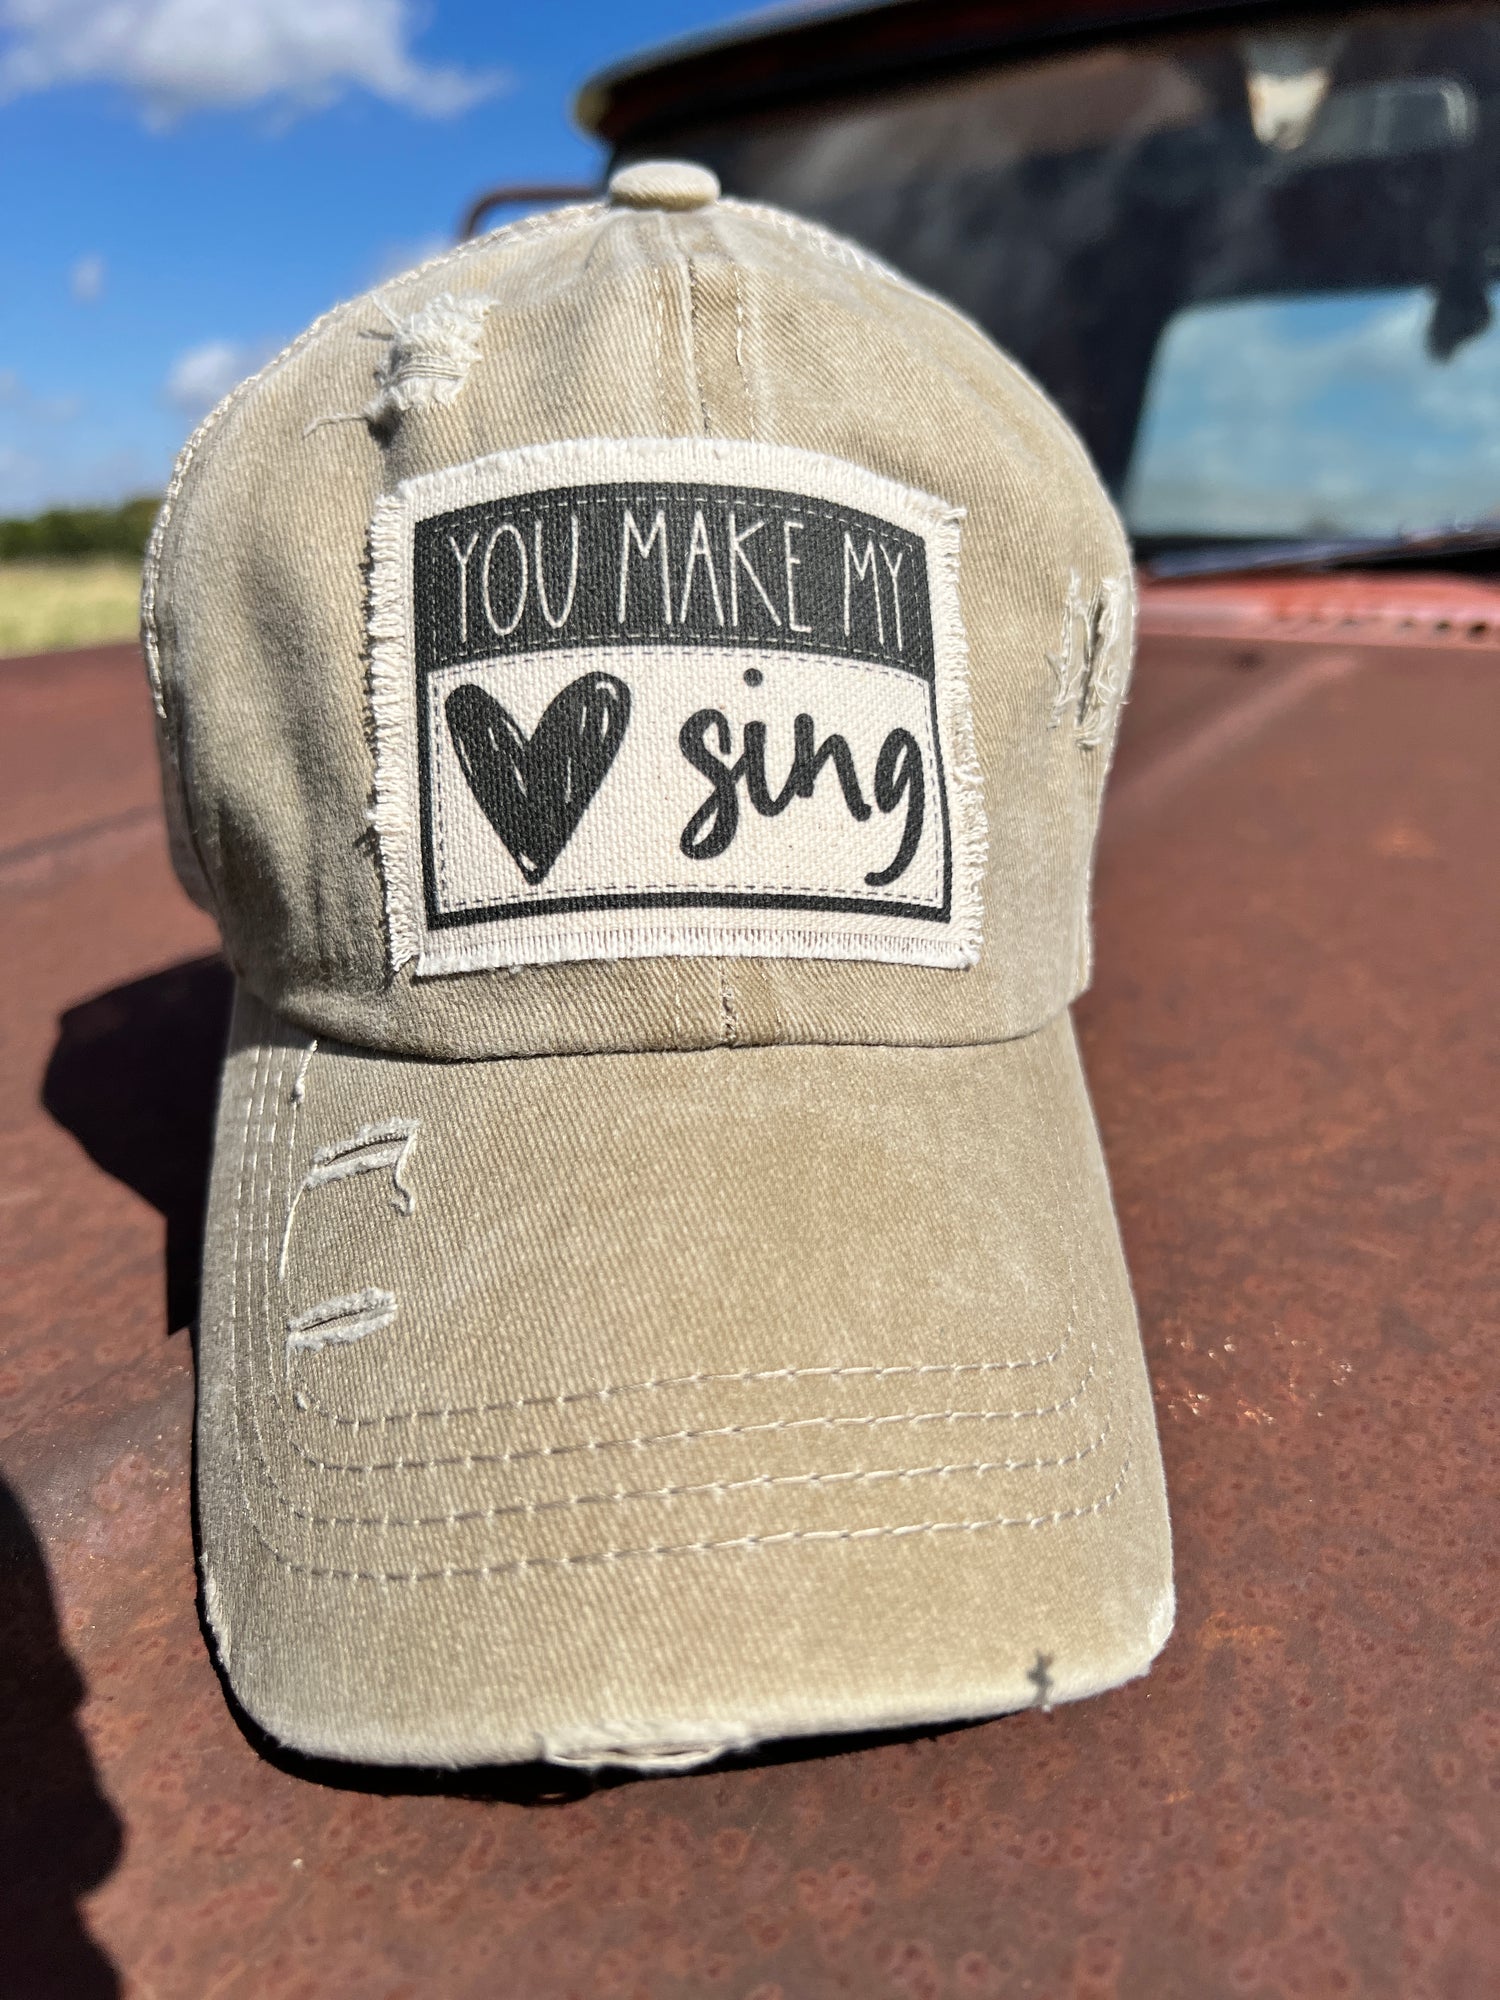 Khaki baseball cap with material patch saying You Make My Heart Sing